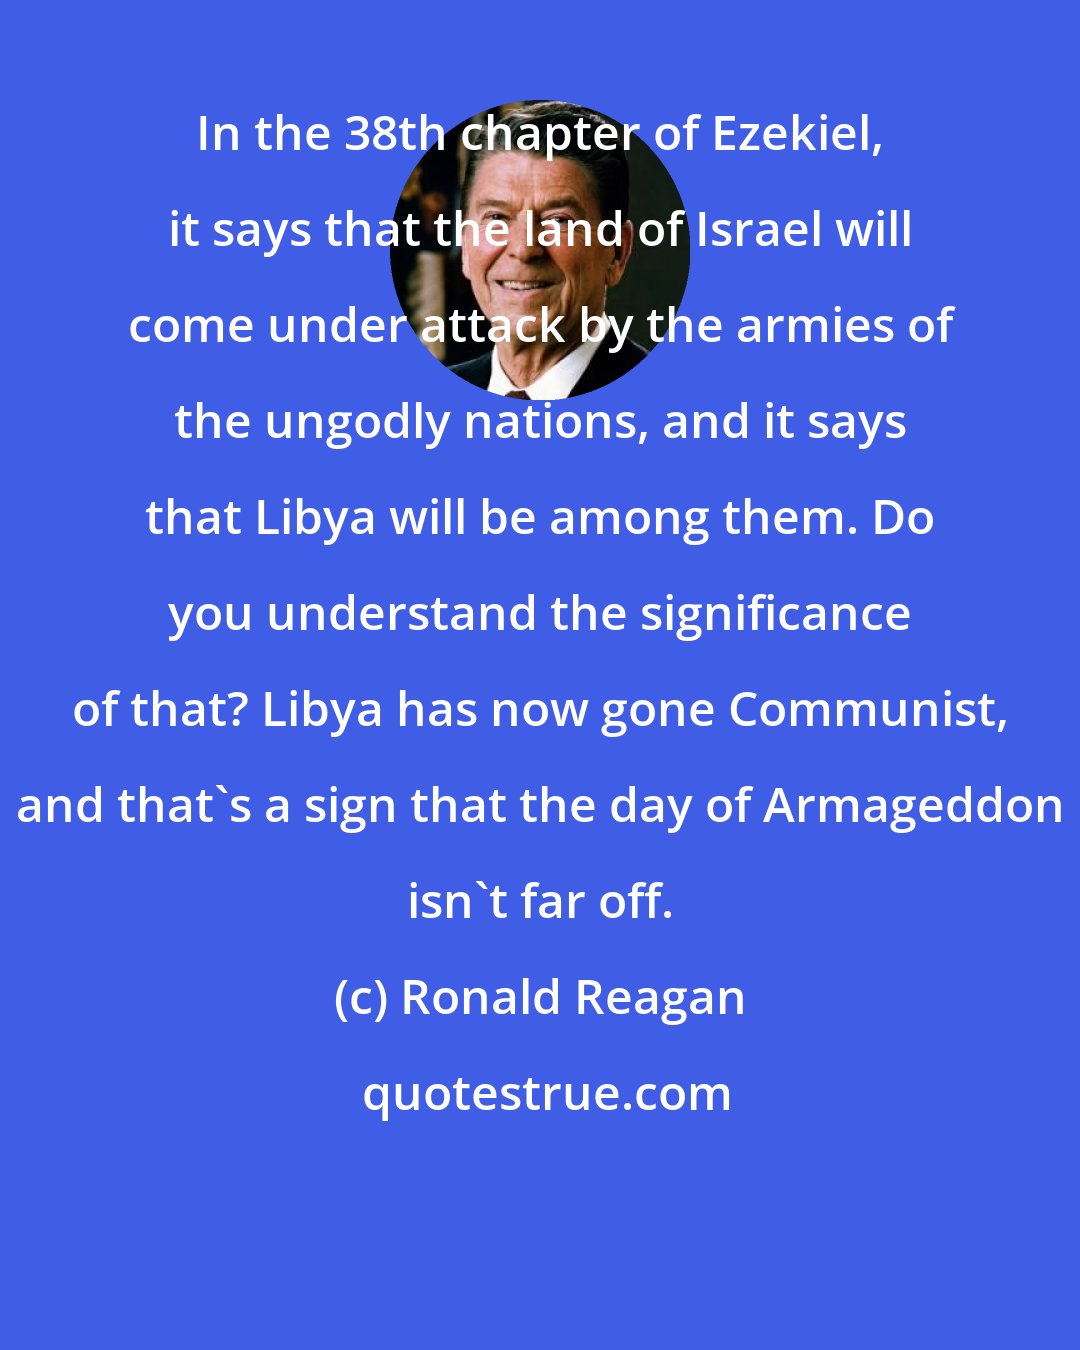 Ronald Reagan: In the 38th chapter of Ezekiel, it says that the land of Israel will come under attack by the armies of the ungodly nations, and it says that Libya will be among them. Do you understand the significance of that? Libya has now gone Communist, and that's a sign that the day of Armageddon isn't far off.